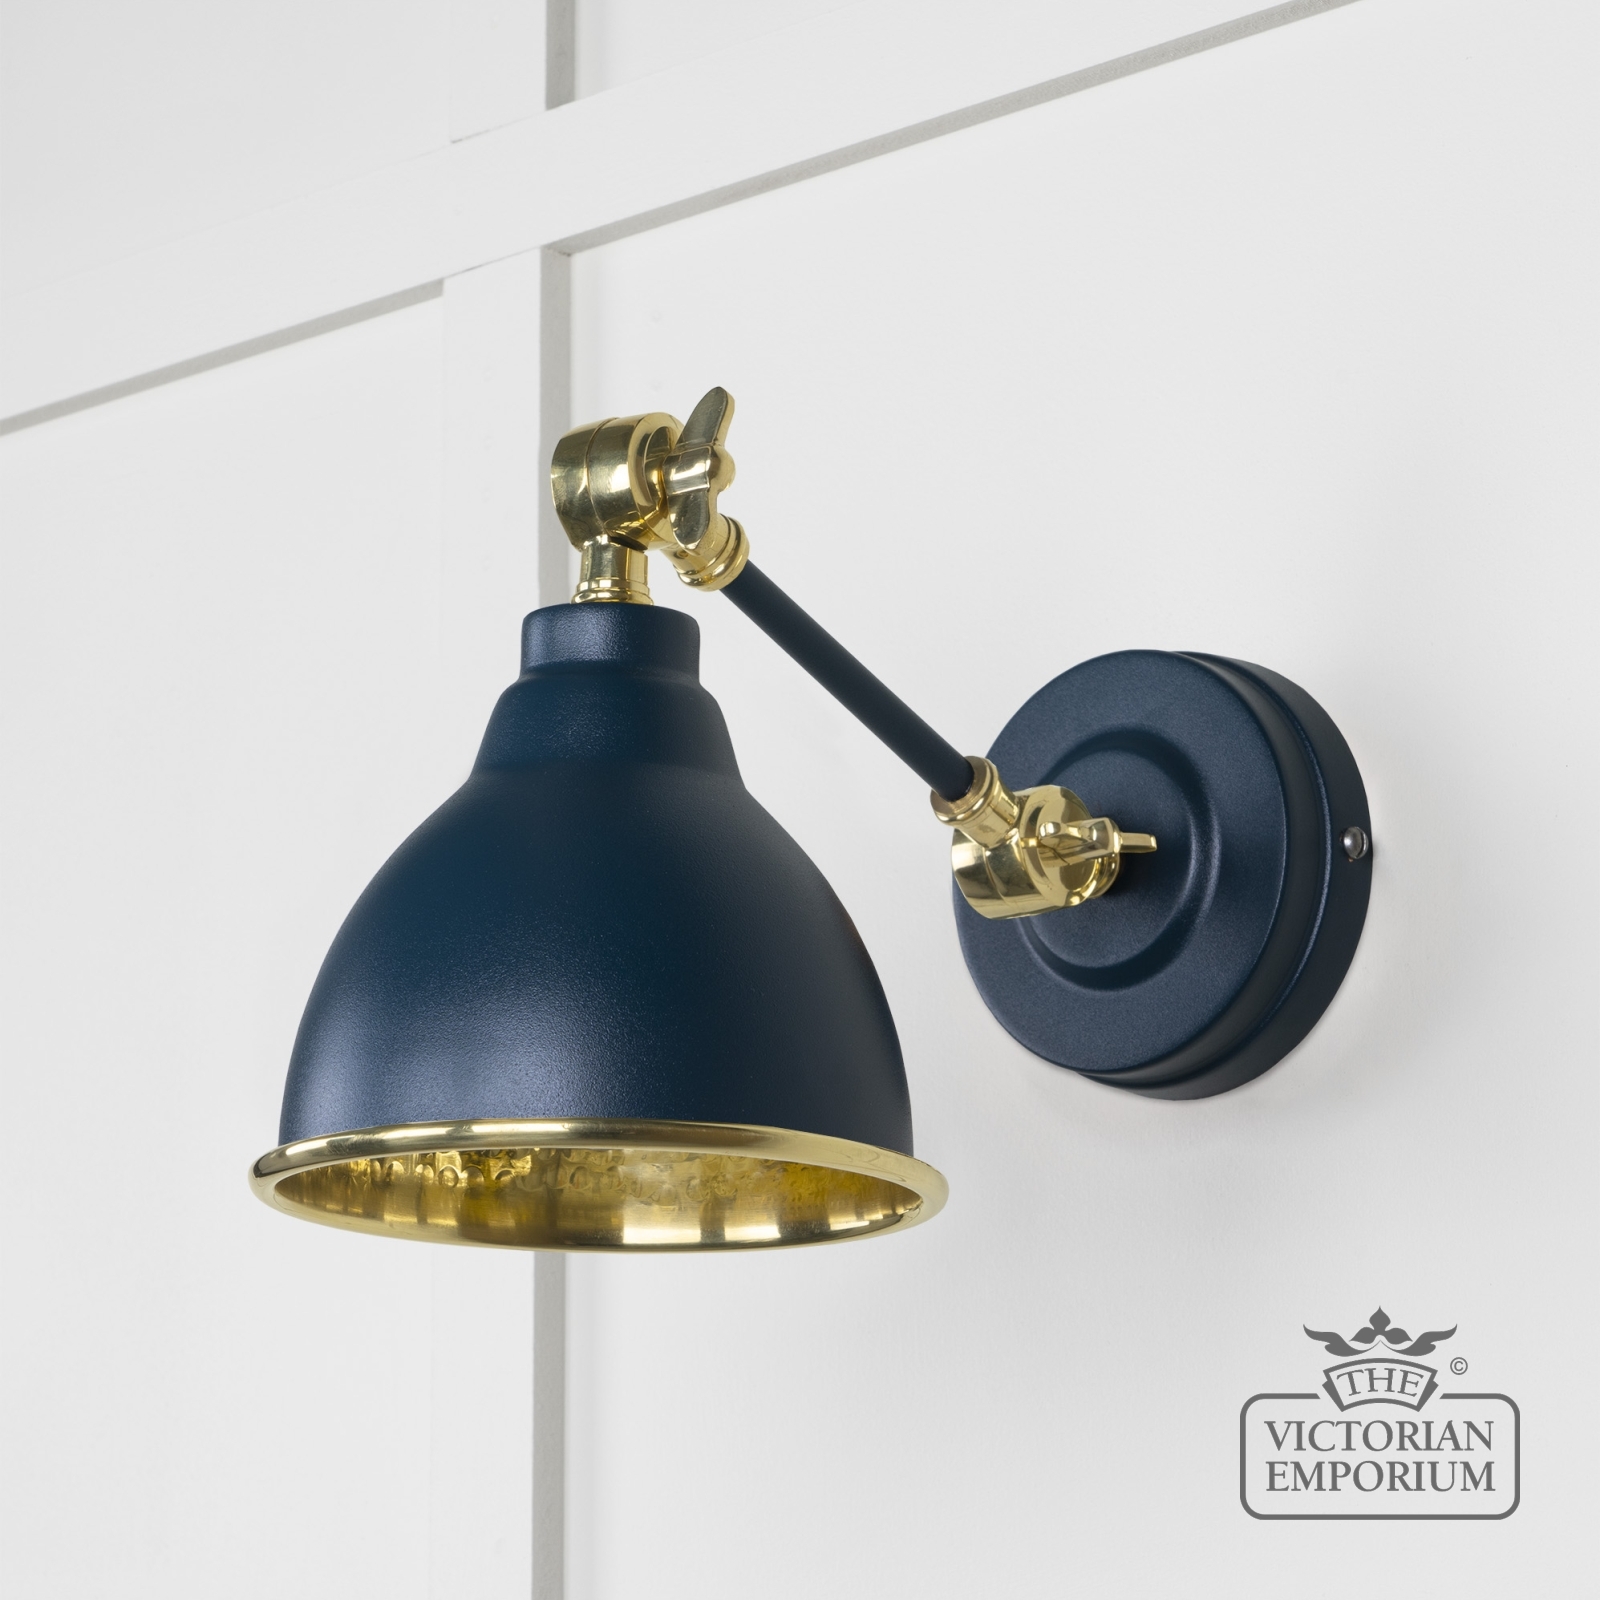 Brindle Wall Light in Hammered Brass with Dusk Exterior